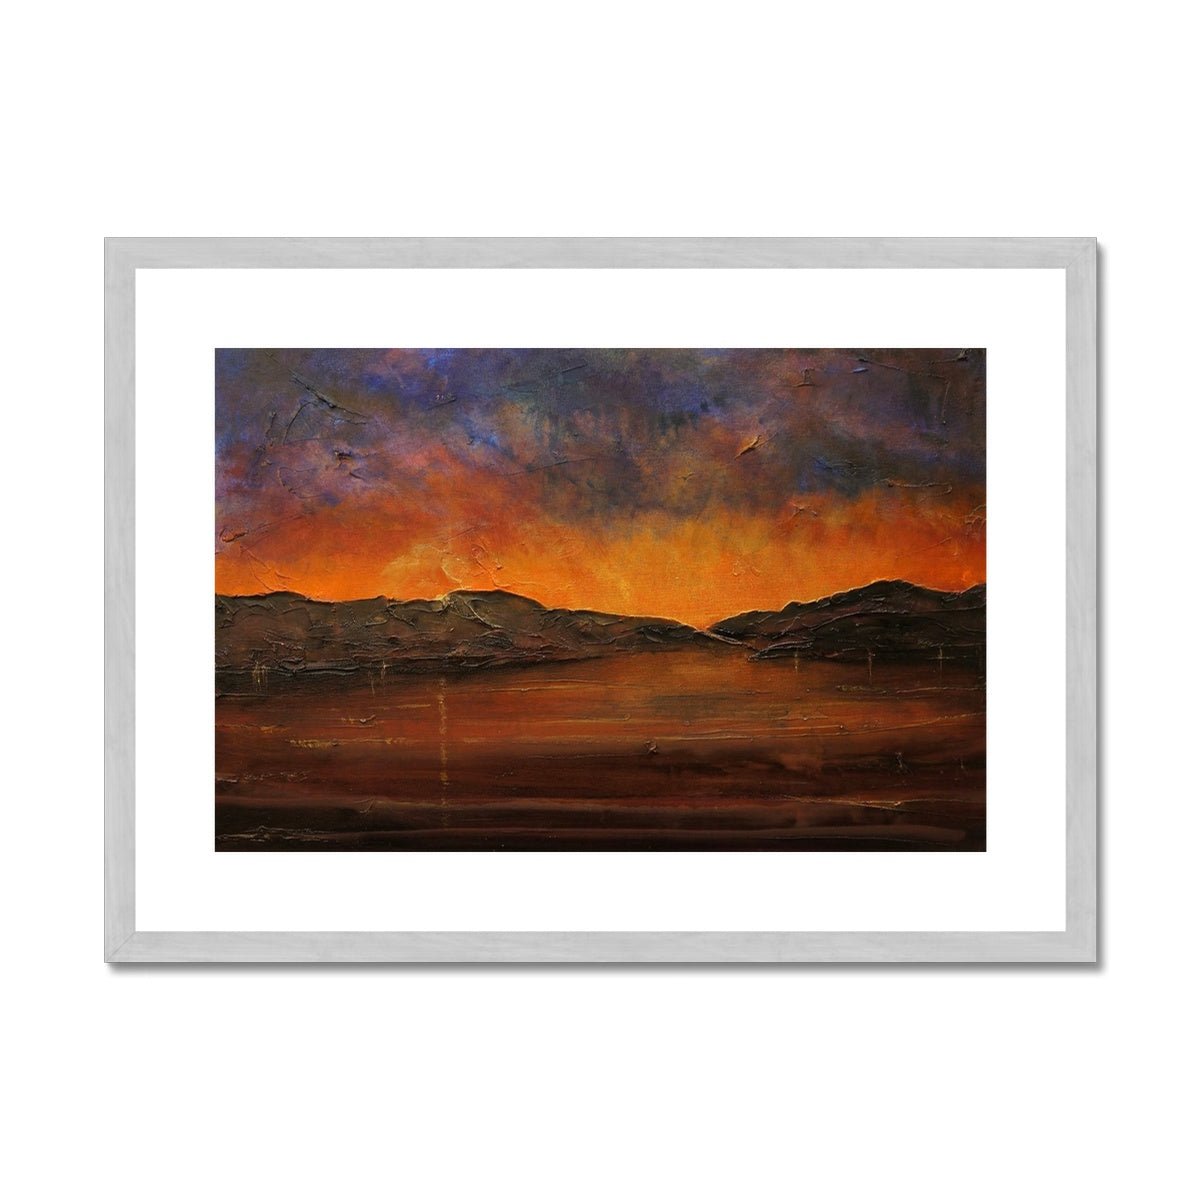 A Brooding River Clyde Dusk Painting | Antique Framed & Mounted Prints From Scotland-Antique Framed & Mounted Prints-River Clyde Art Gallery-A2 Landscape-Silver Frame-Paintings, Prints, Homeware, Art Gifts From Scotland By Scottish Artist Kevin Hunter